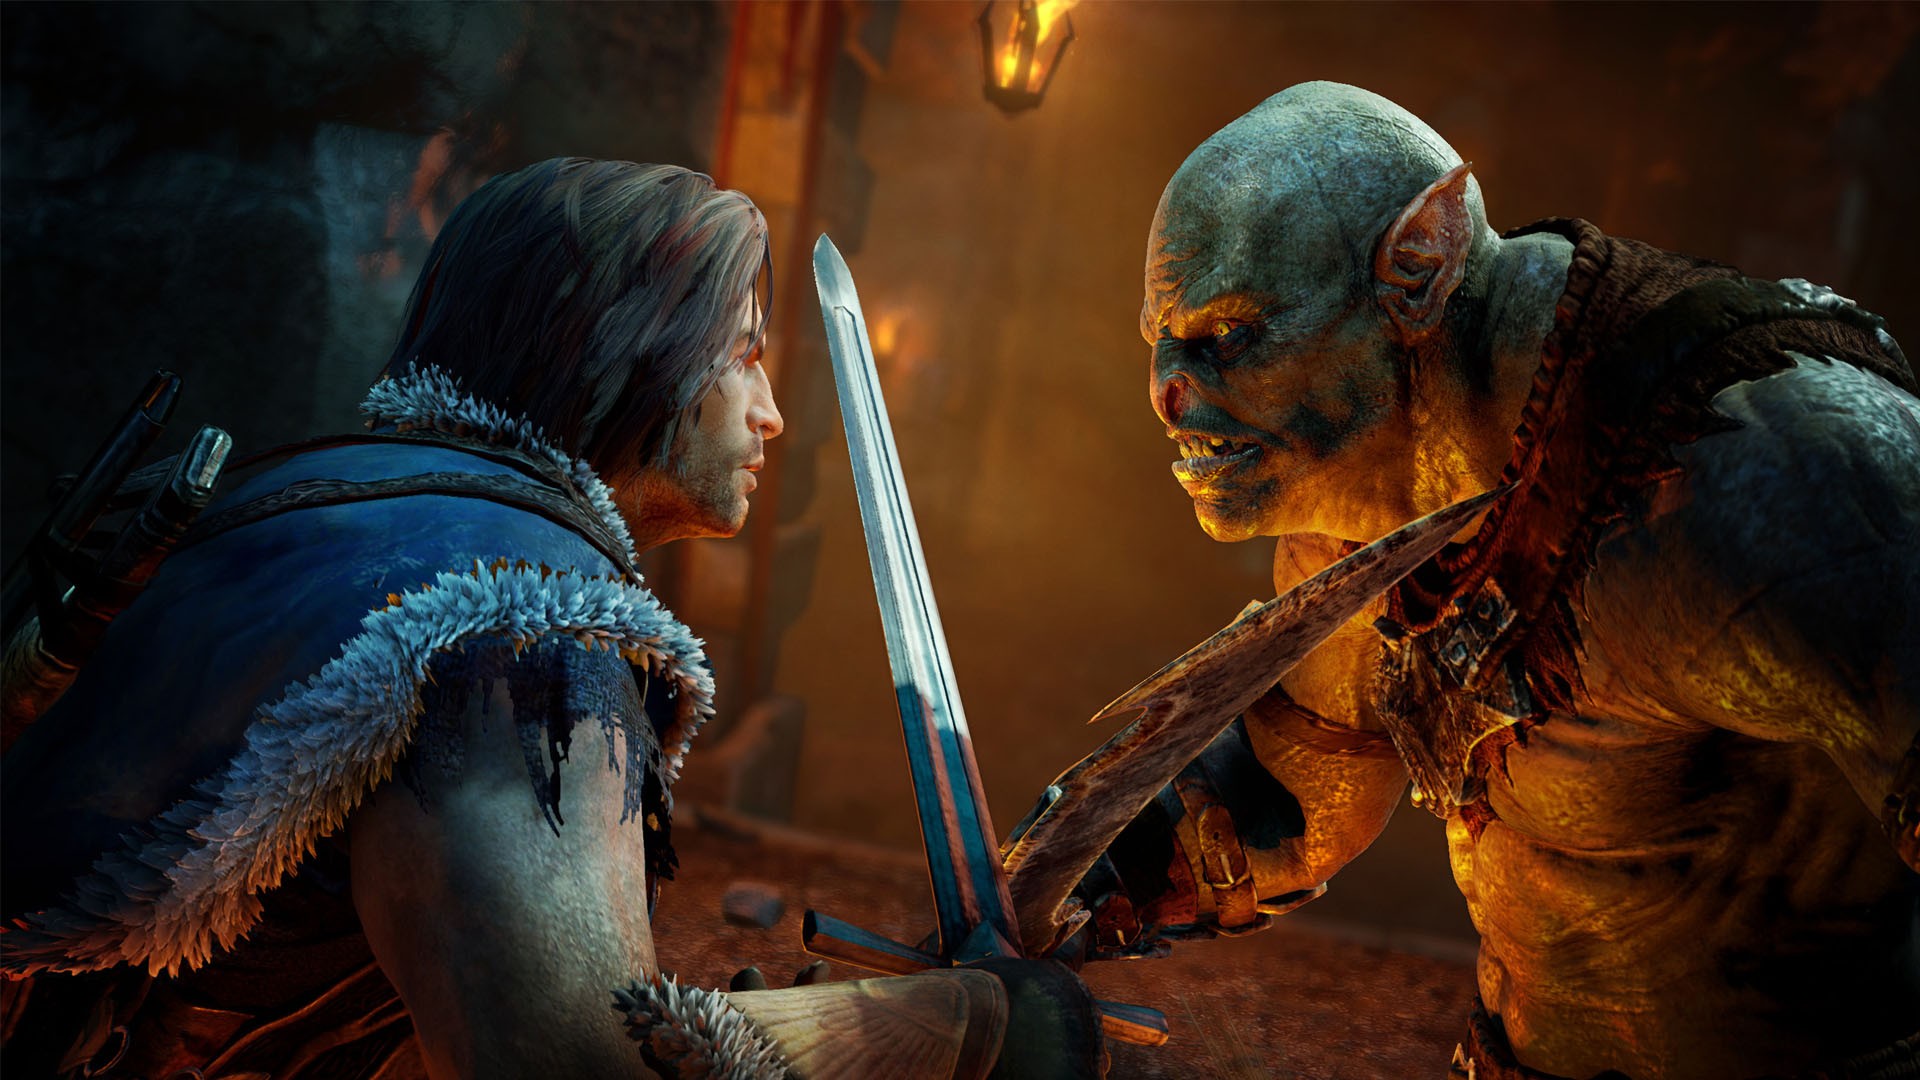 Middle-earth: Shadow of Mordor - The Bright Lord - Metacritic